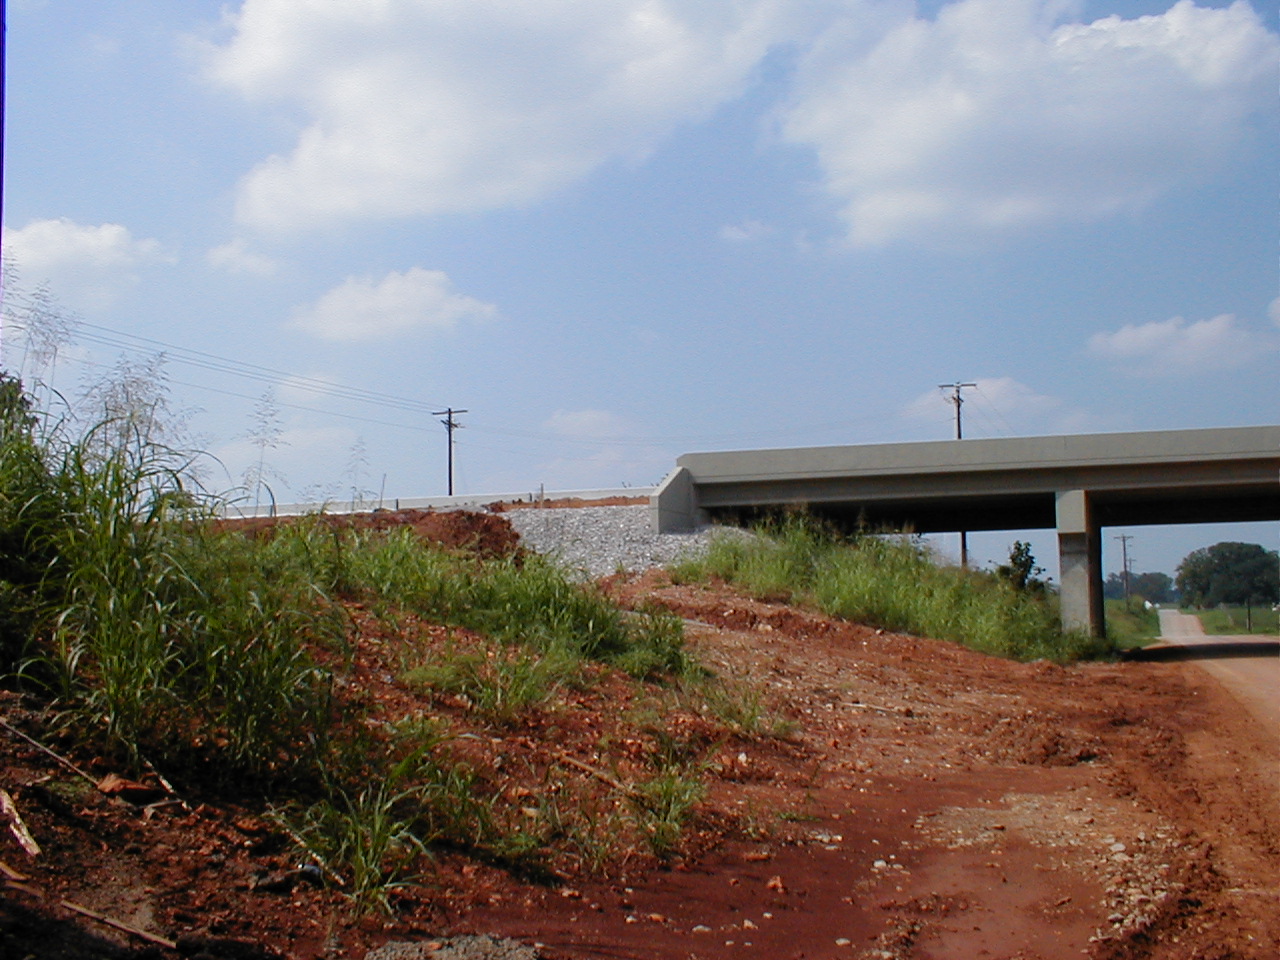 This shows one end of the south bound bridge. This picture is taken on the side with new lanes.